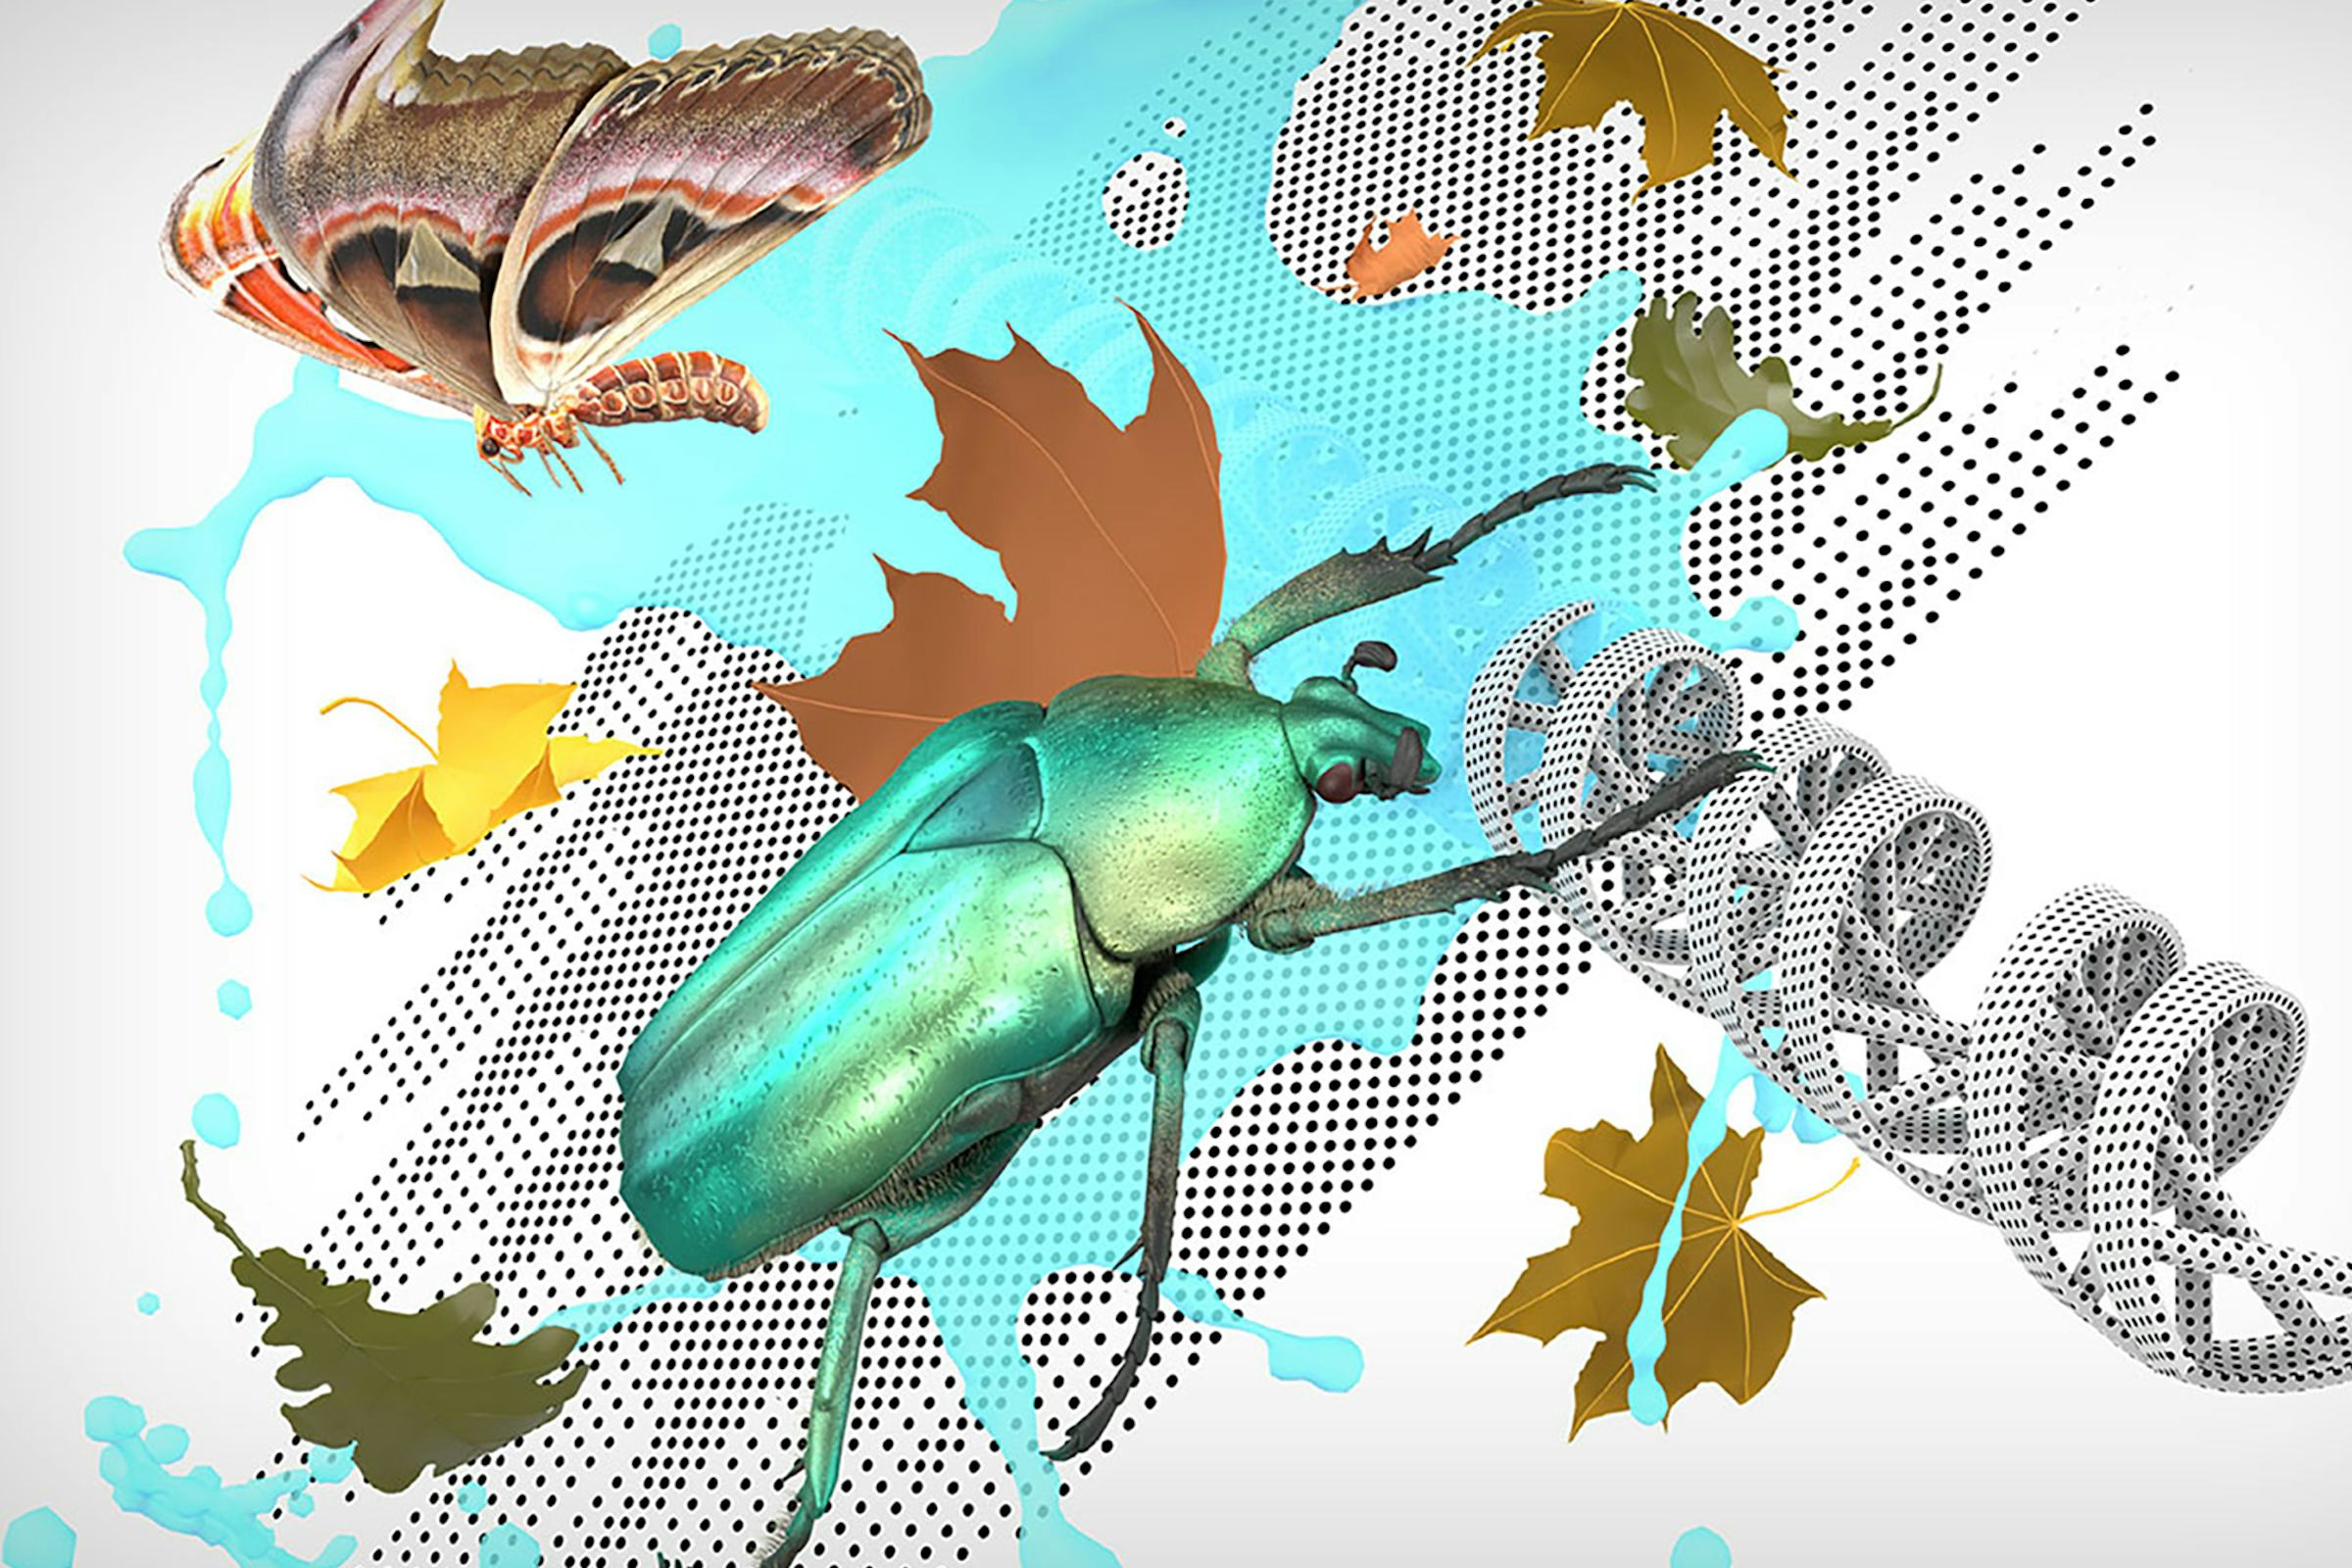 A montage of beetles, leaves, butterflies and DNA